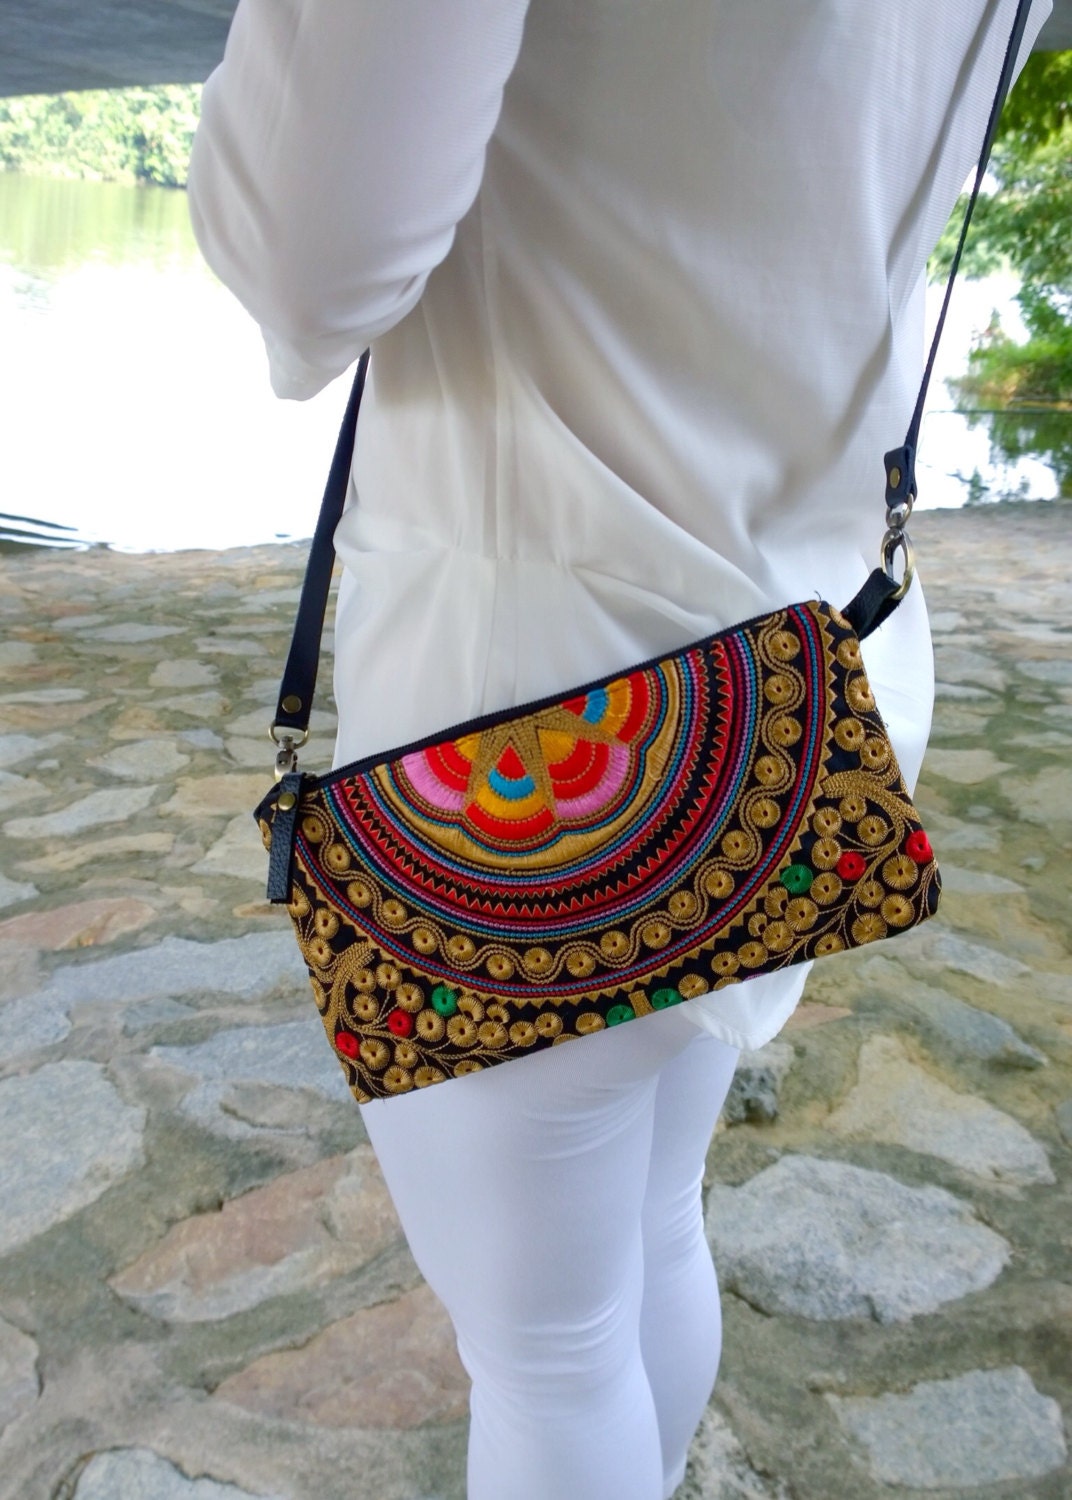 Gold Hmong Boho Leather Embroidery Bag Ethnic by pasaboho on Etsy